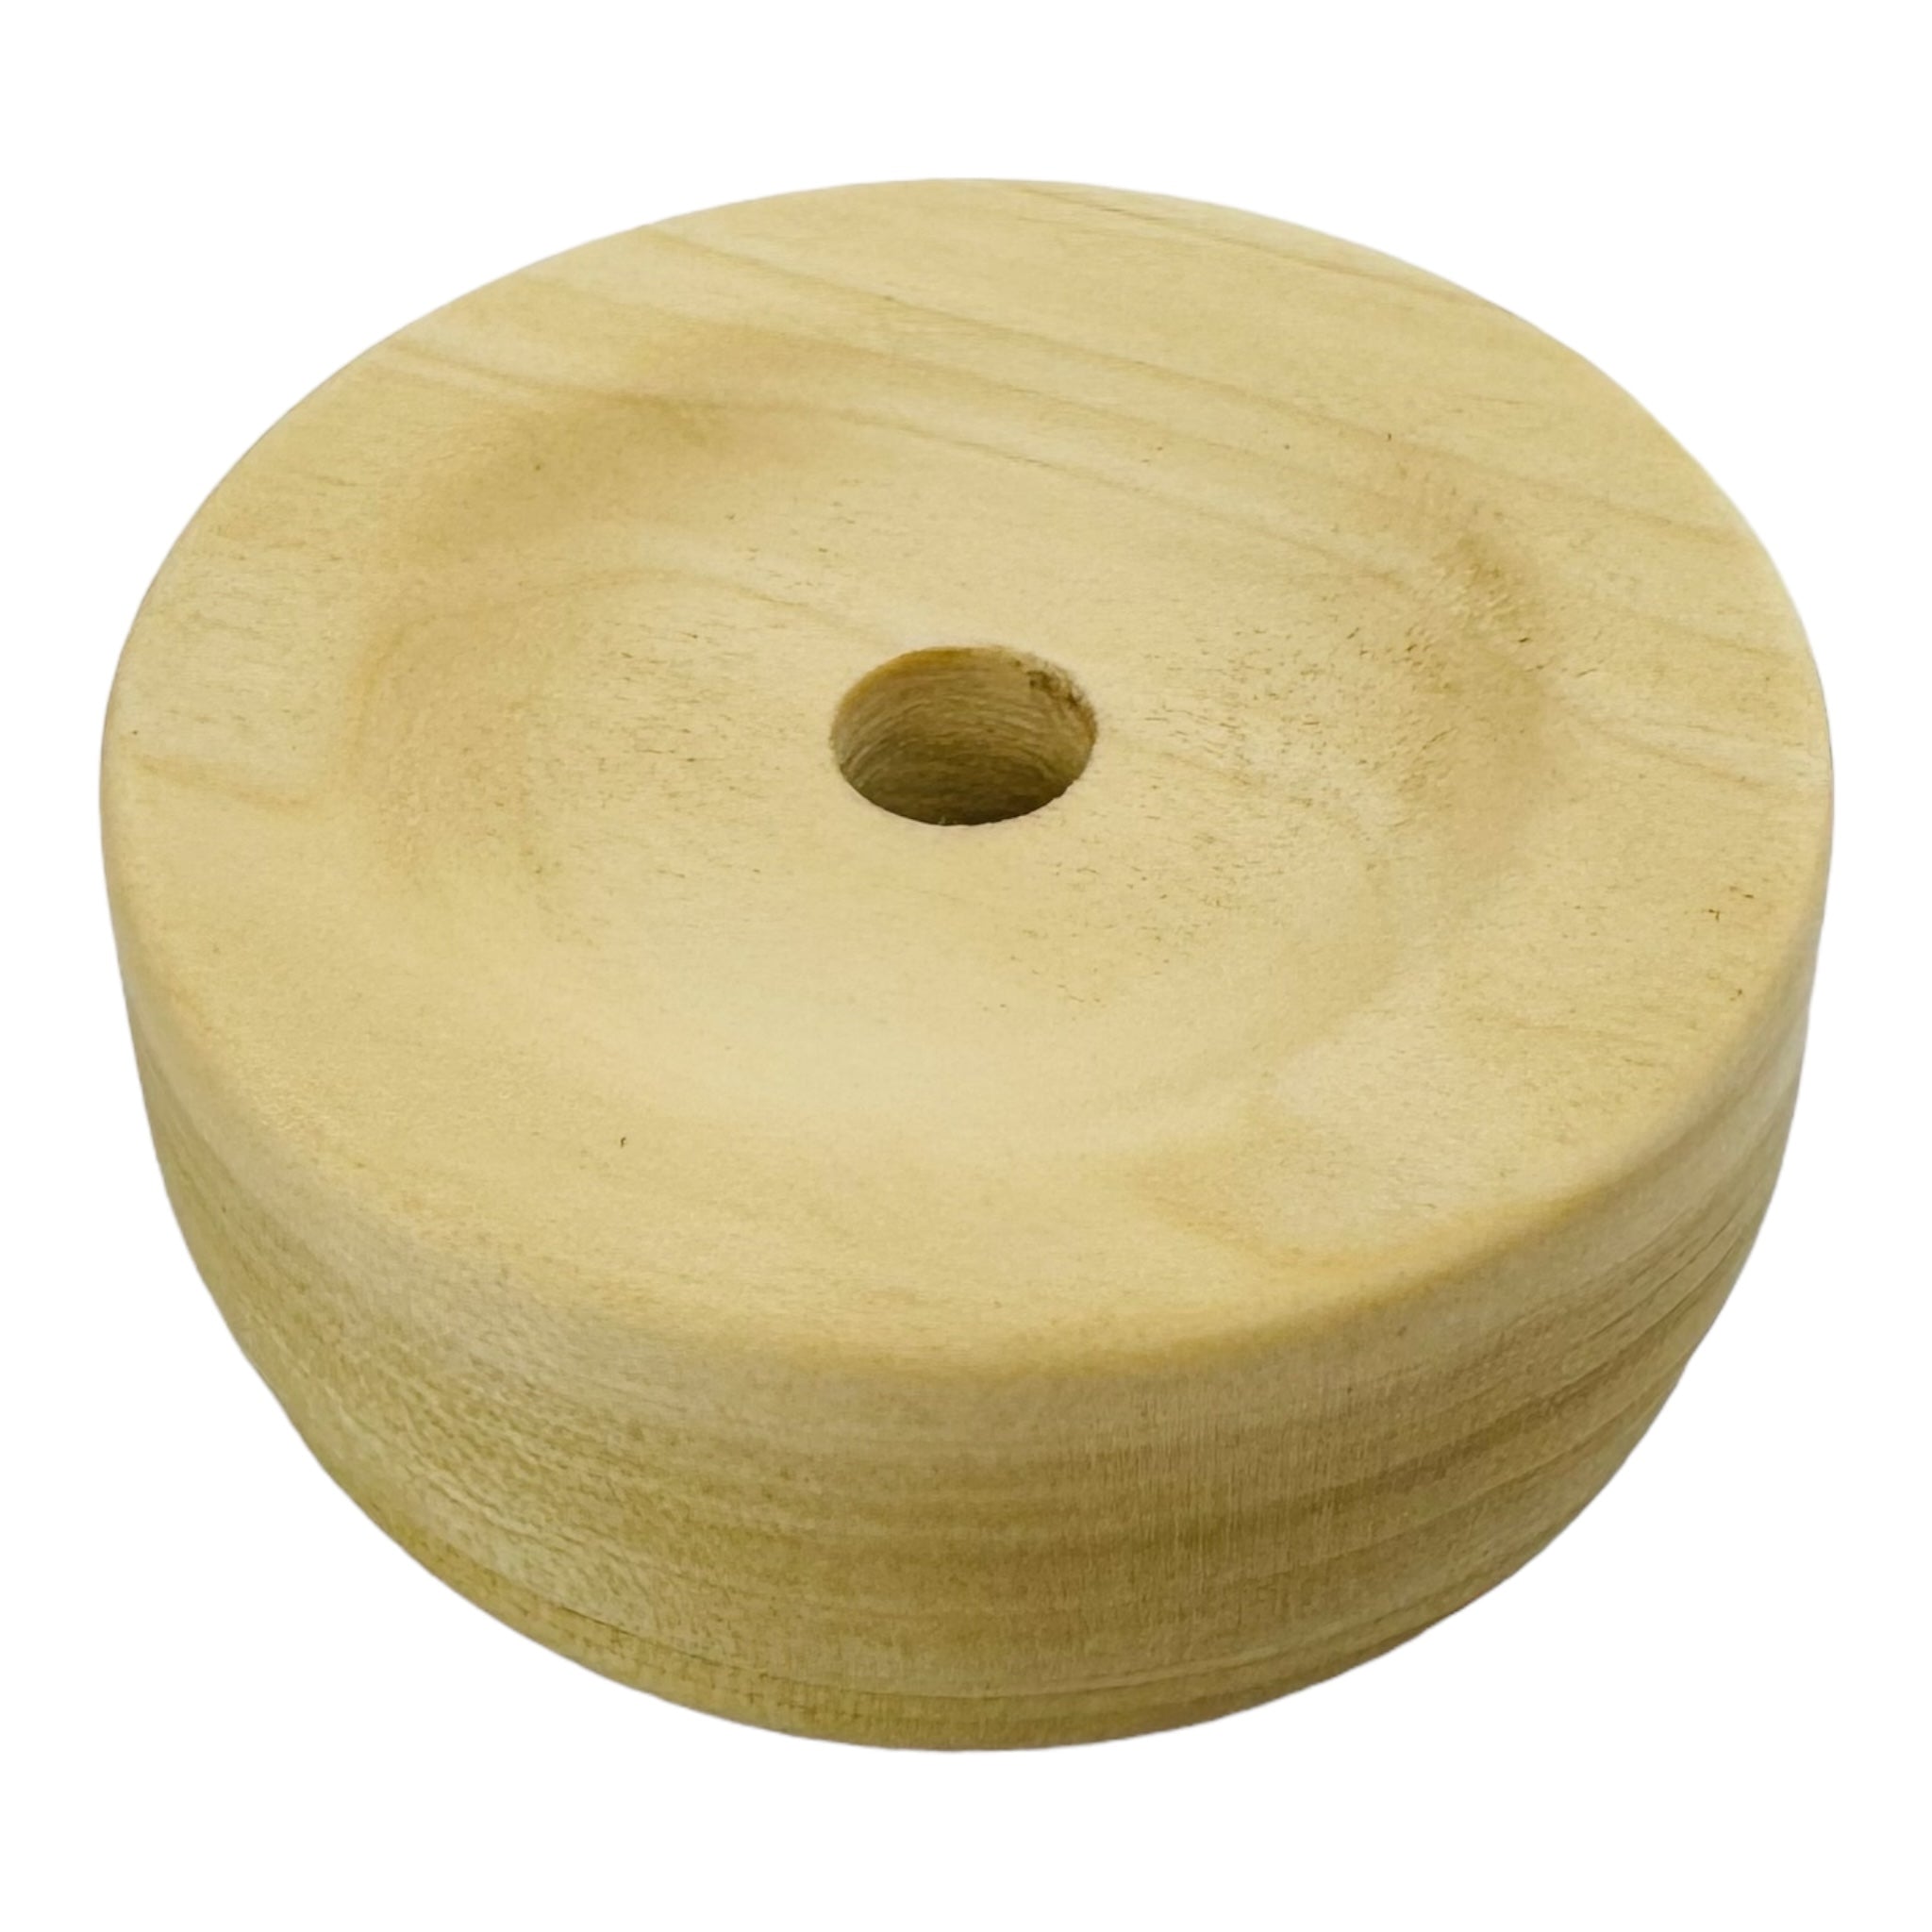 Single Hole Wood Display Stand Holder For 14mm Bong Bowl Pieces Or Quartz Bangers